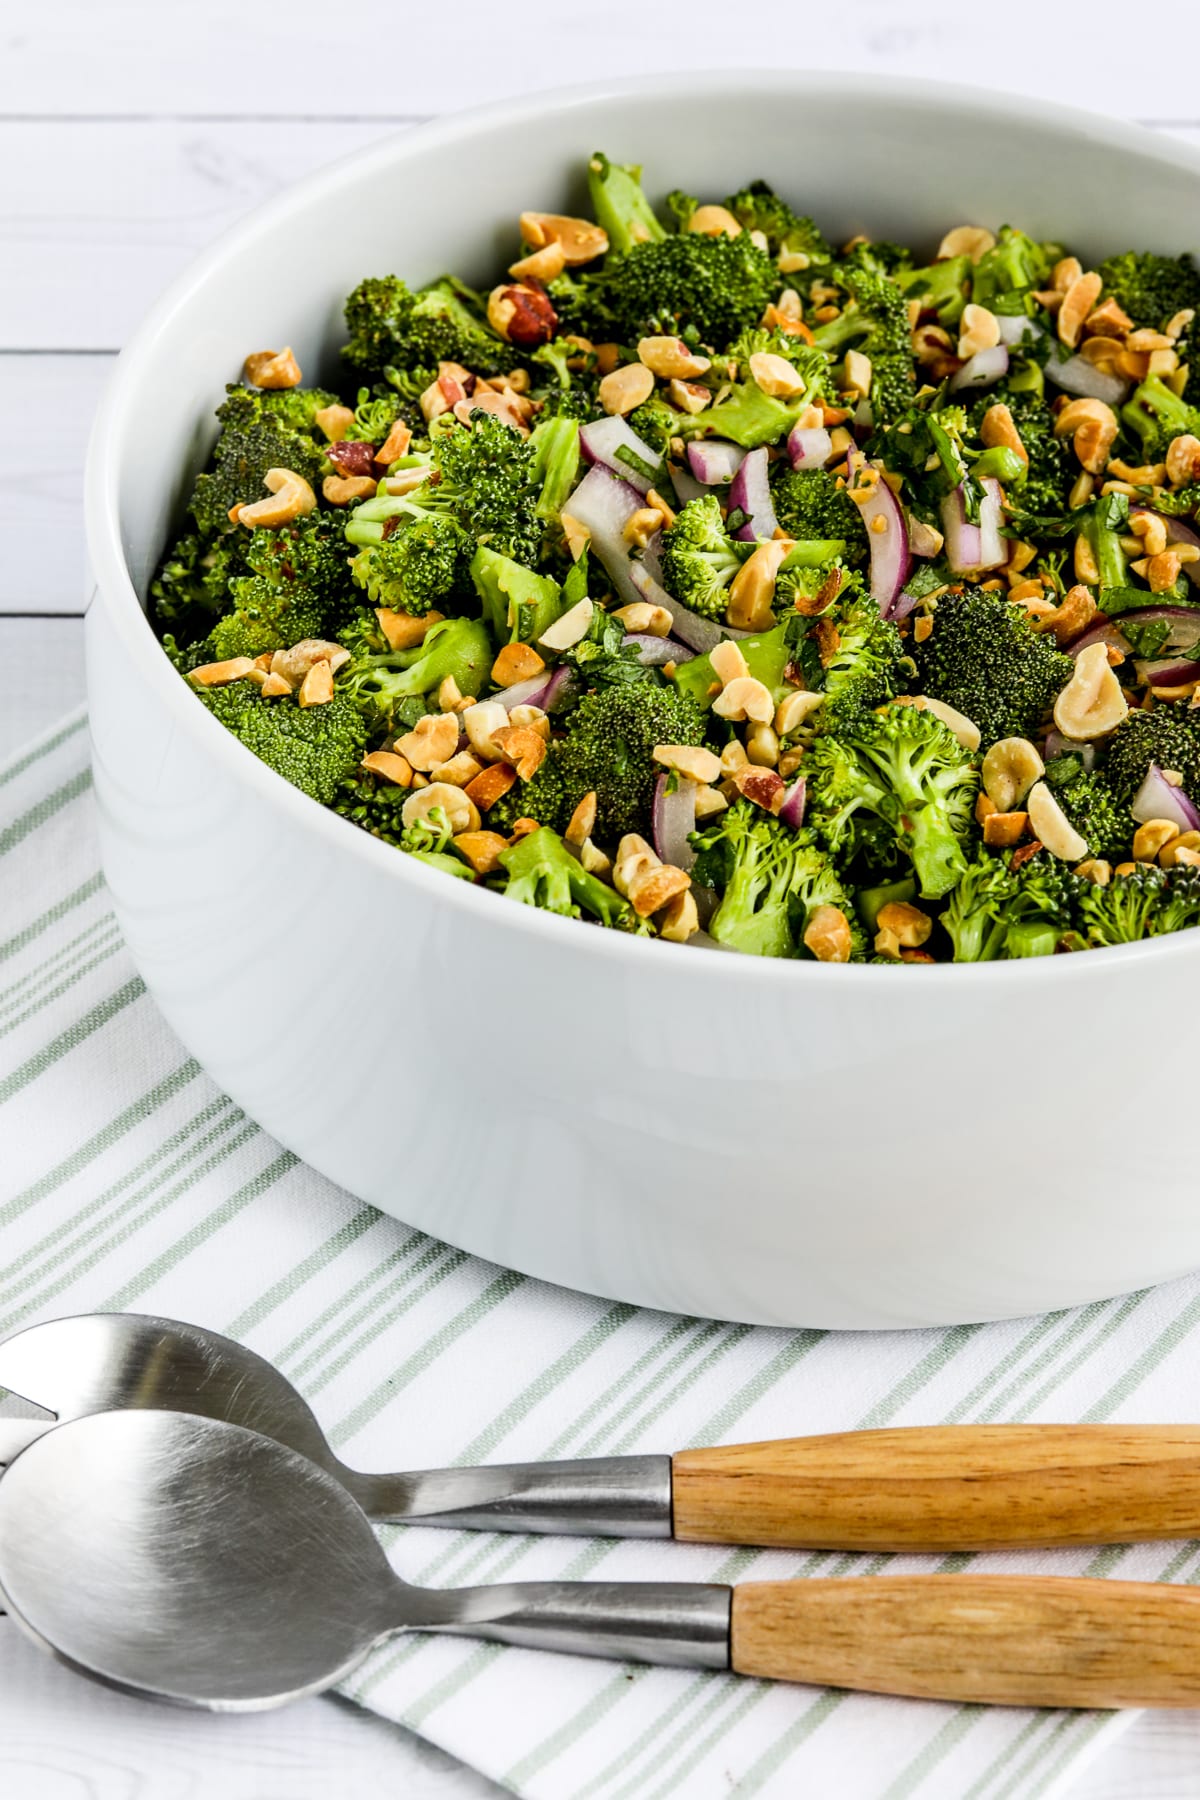 Broccoli Salad in serving bowl on napkin with serving fork and spoon.